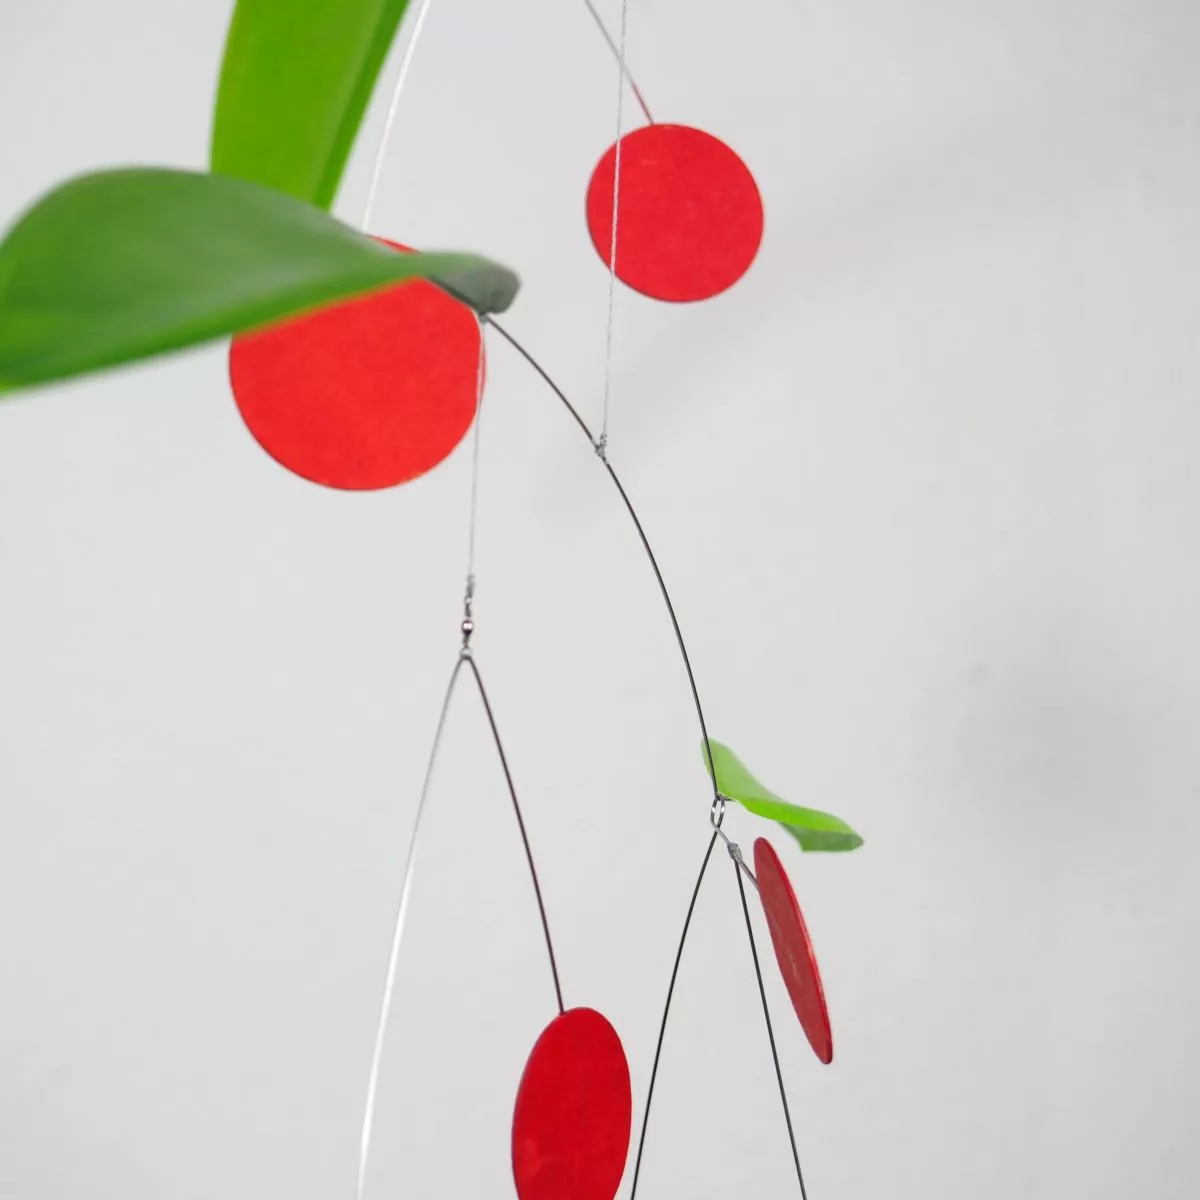 Handmade Art Mobile "Cerezas" made of Lacquered Paper (Large)